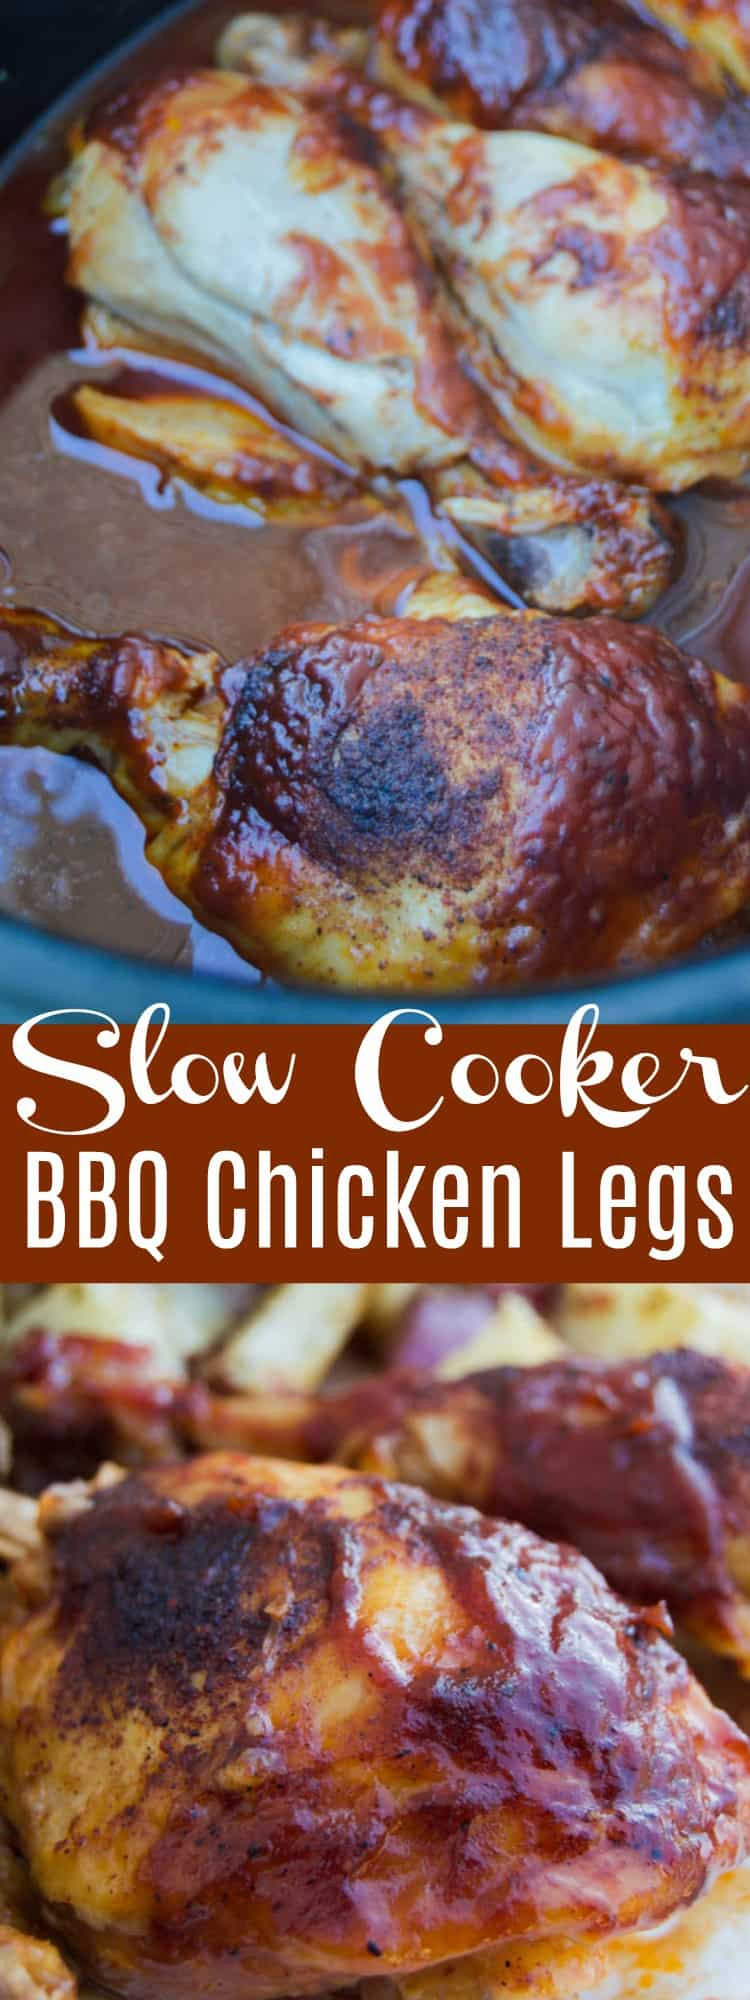 Slow Cooker Bbq Chicken Thighs
 Slow Cooker BBQ Chicken Legs The Diary of a Real Housewife